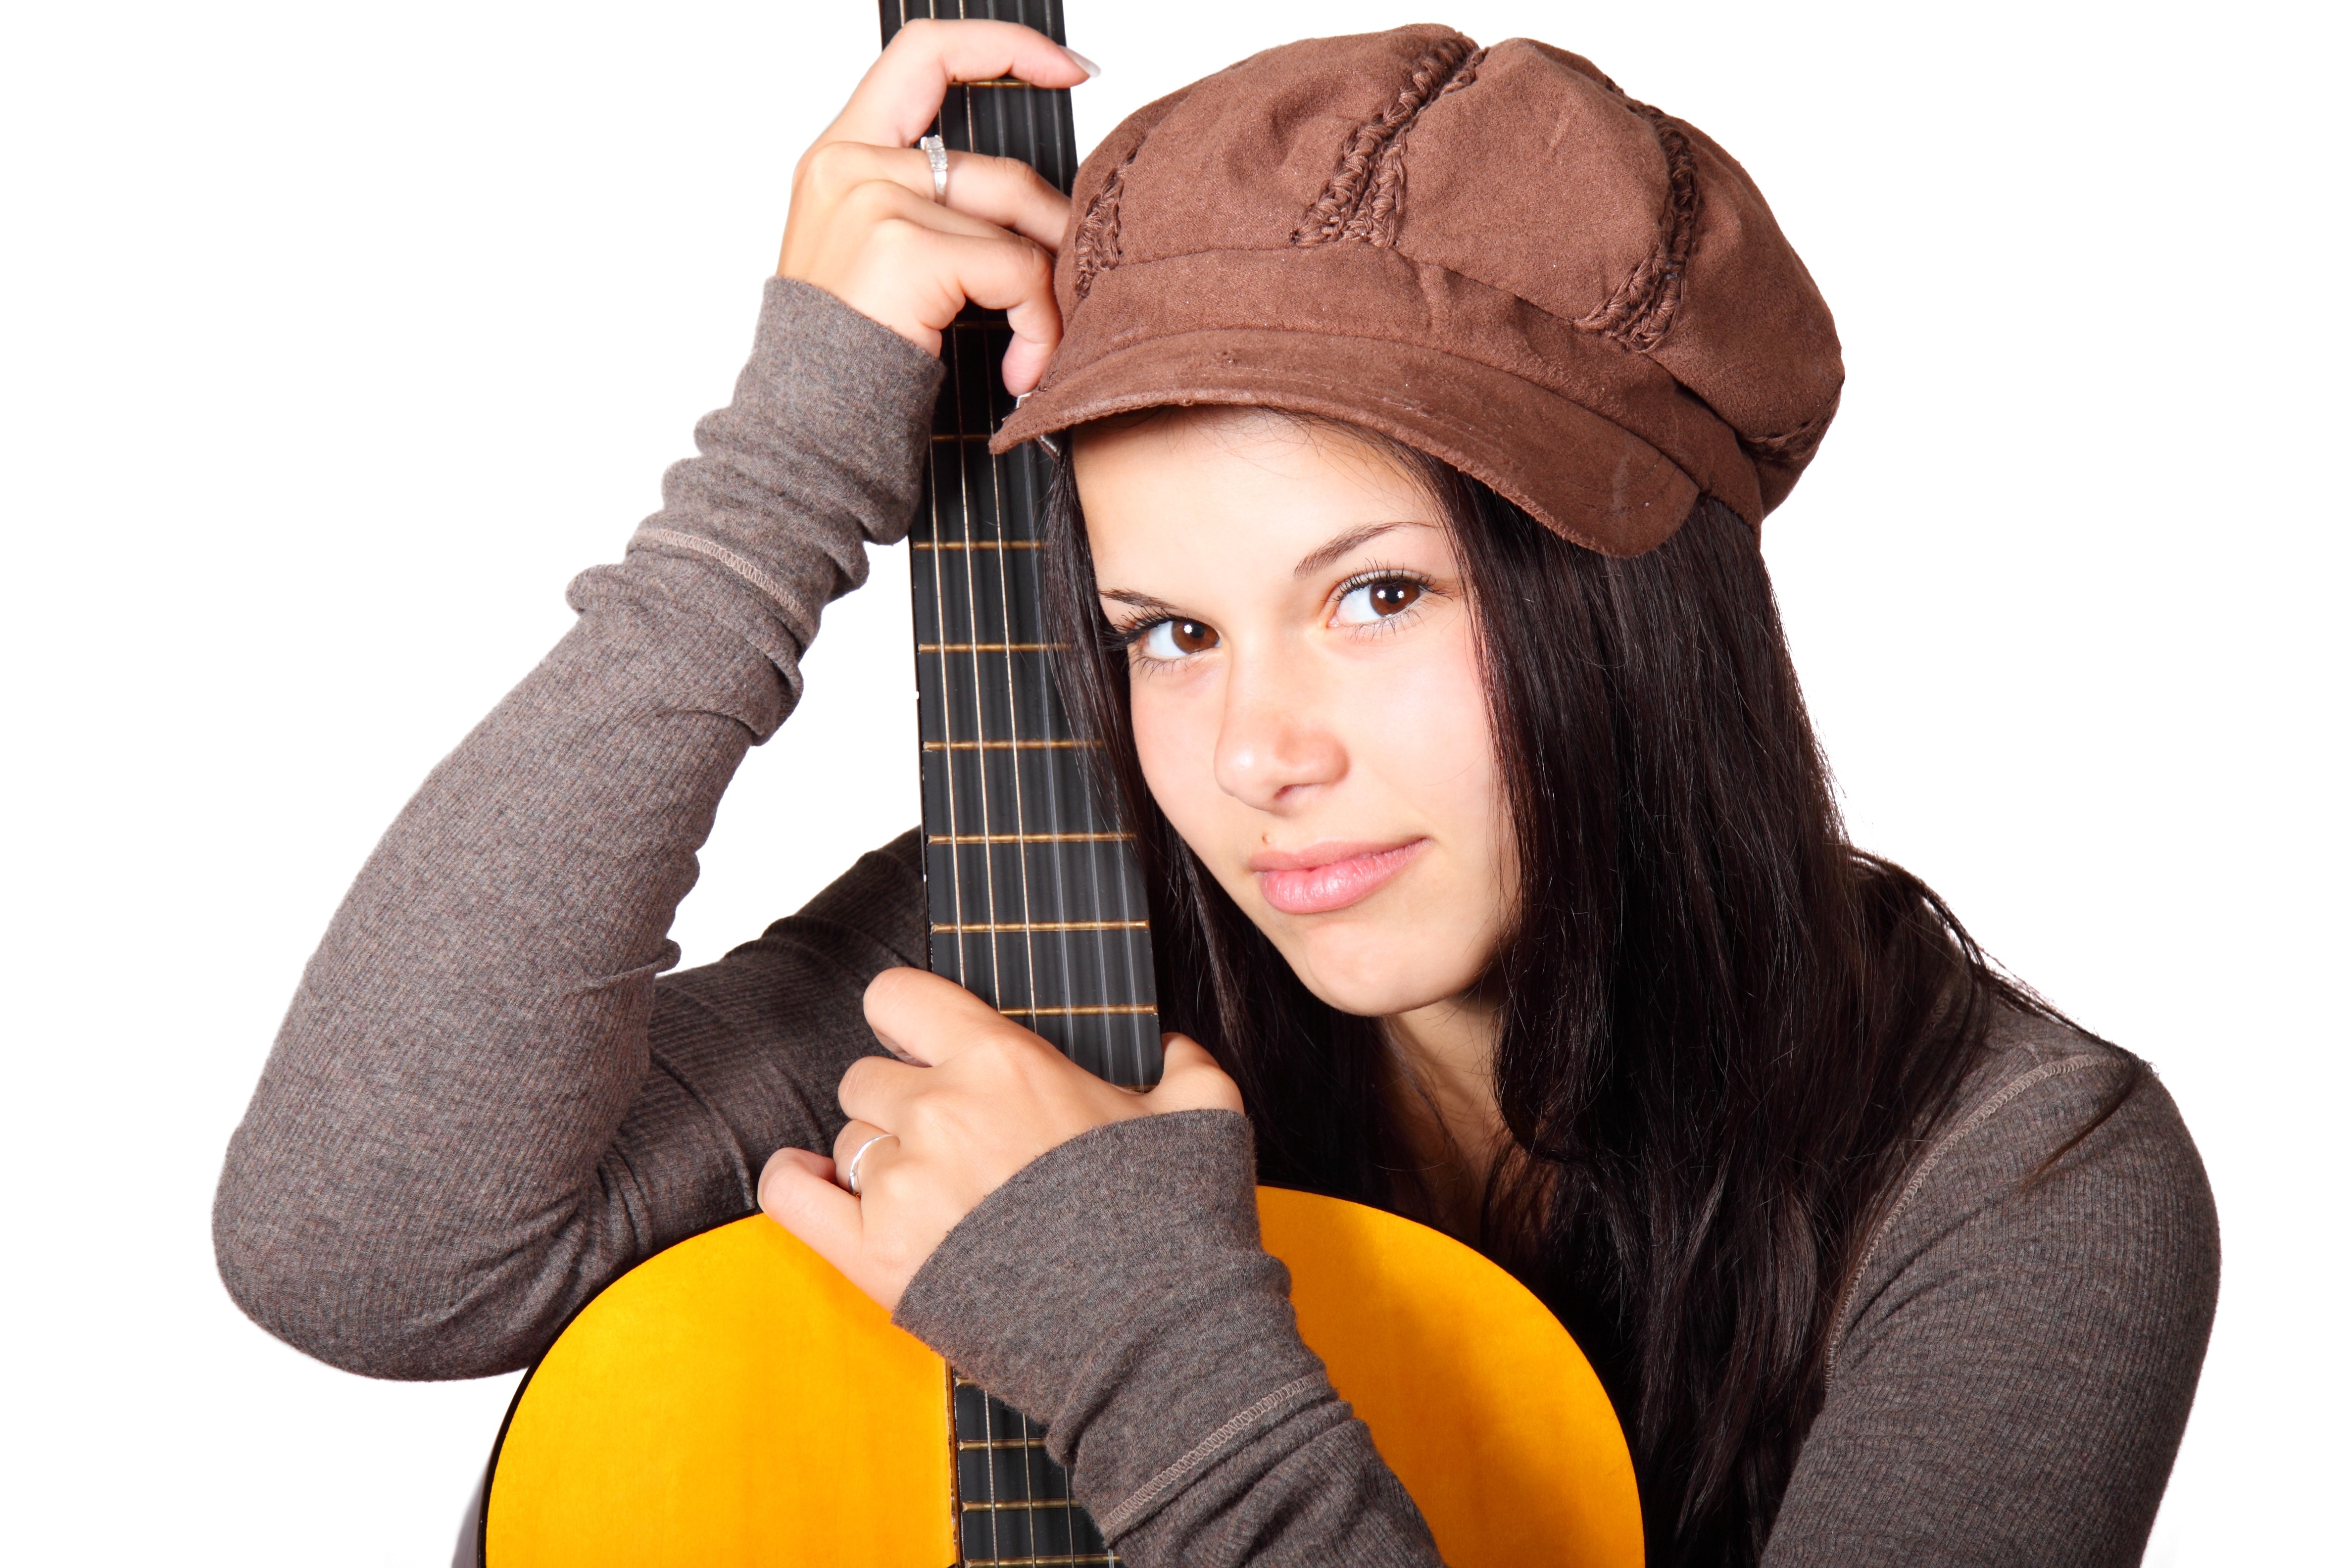 Female, Girl, Cute, Acoustic Guitar, hat, one woman only